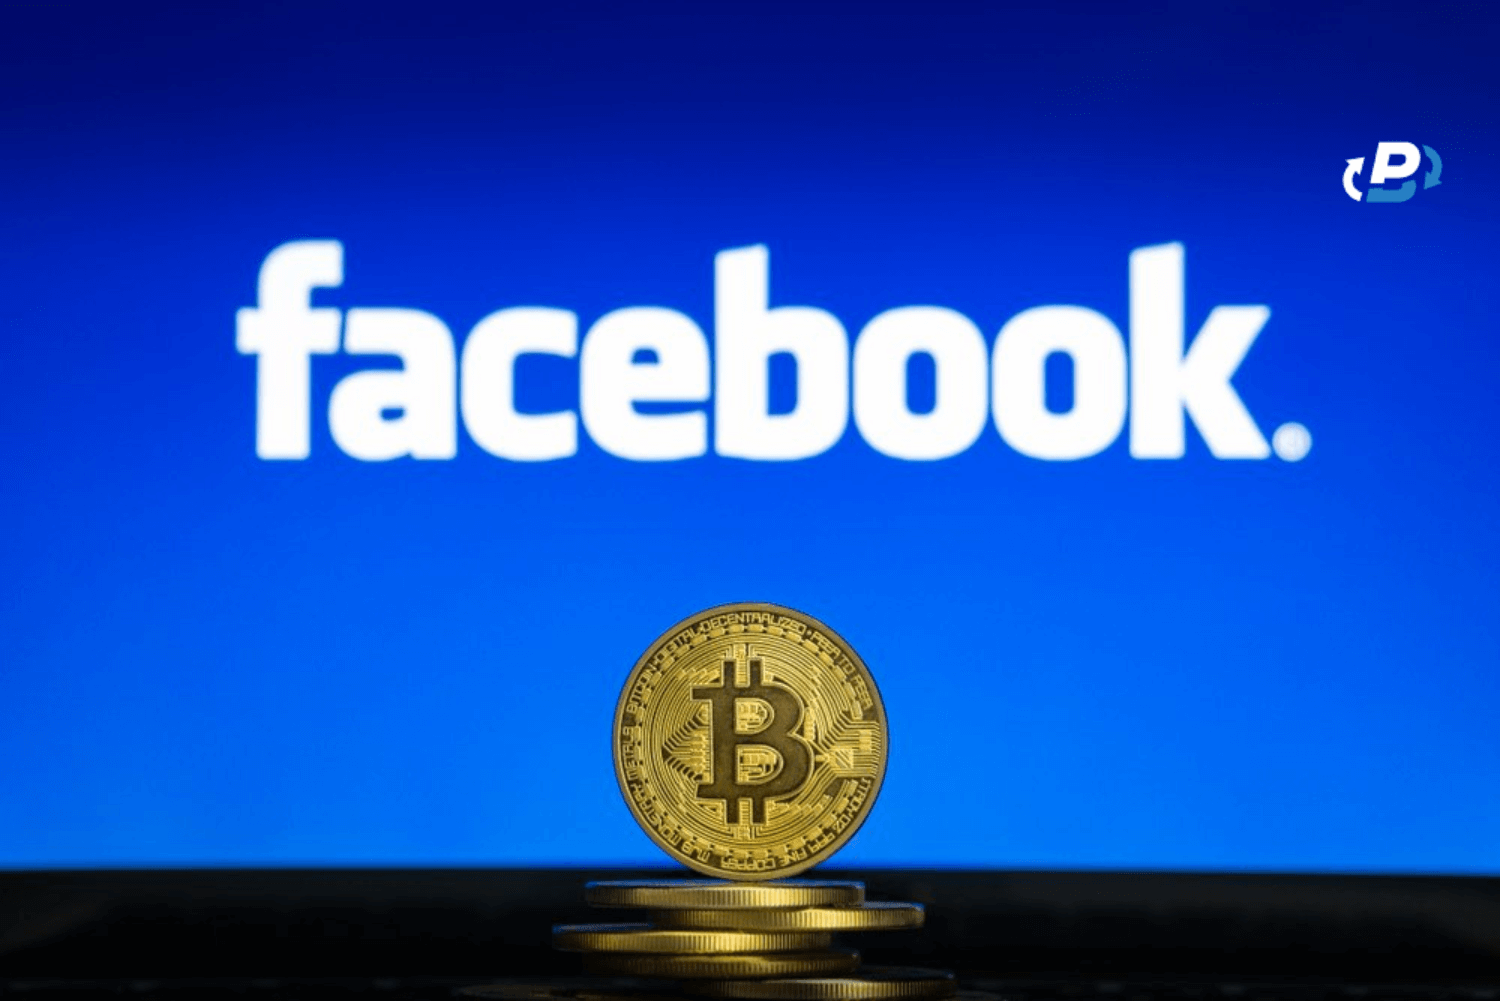 Why Are Crypto Ads Banned On Facebook? The Policy Explored